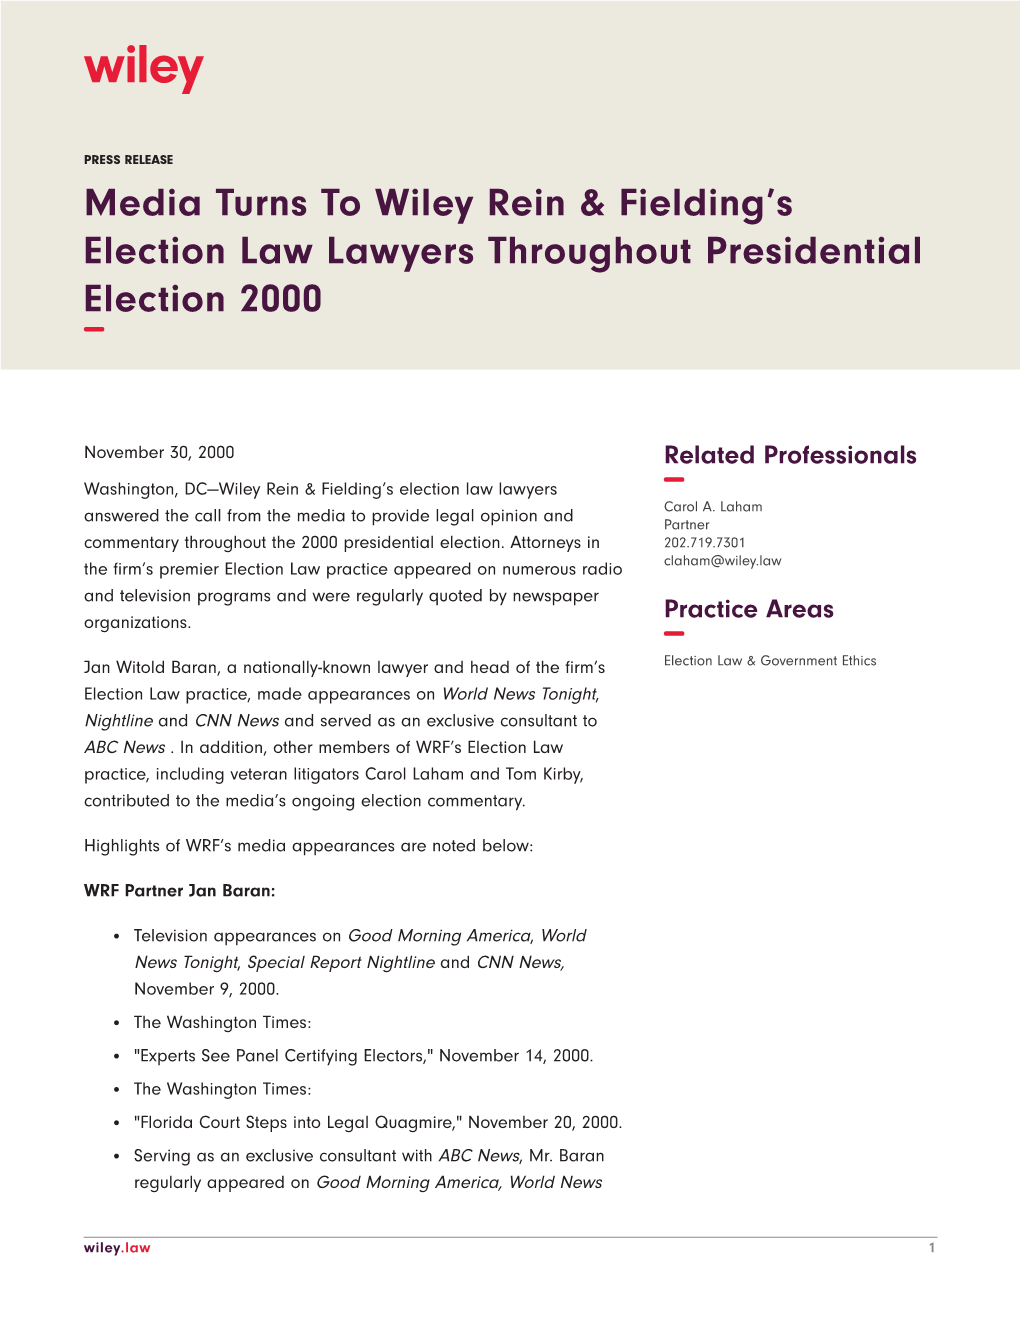 Media Turns to Wiley Rein & Fielding's Election Law Lawyers